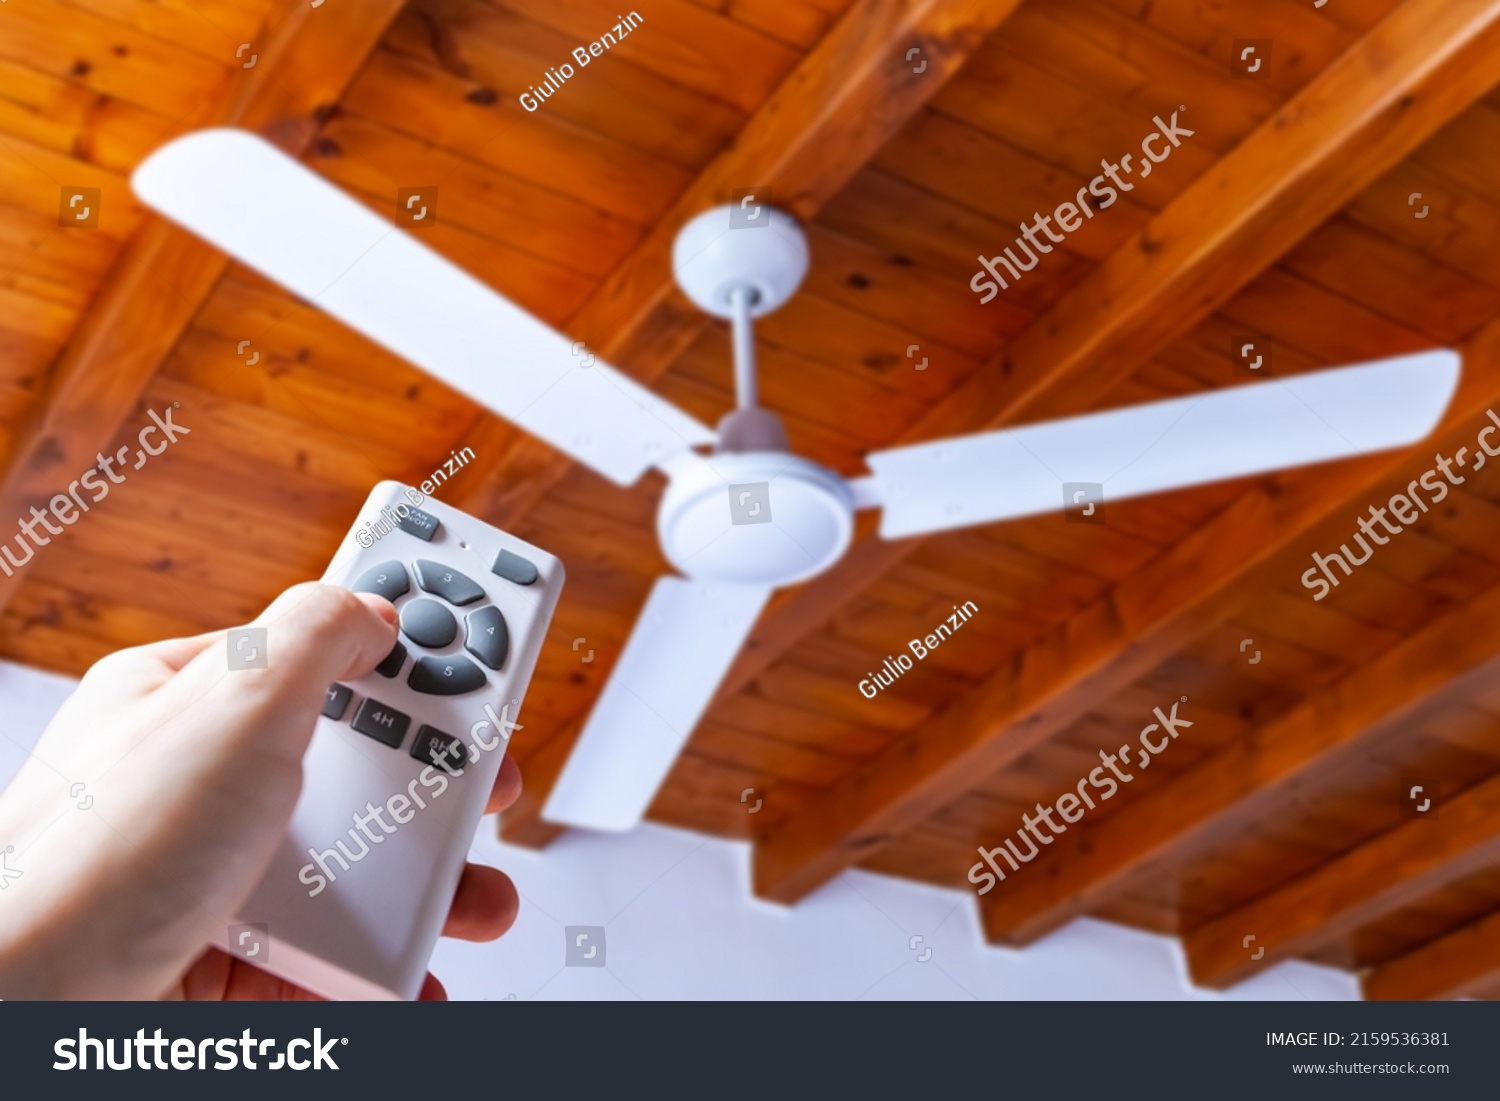 A man uses a remote control to turn on a white ceiling fan mounted in a house with wooden ceilings.	 #2159536381